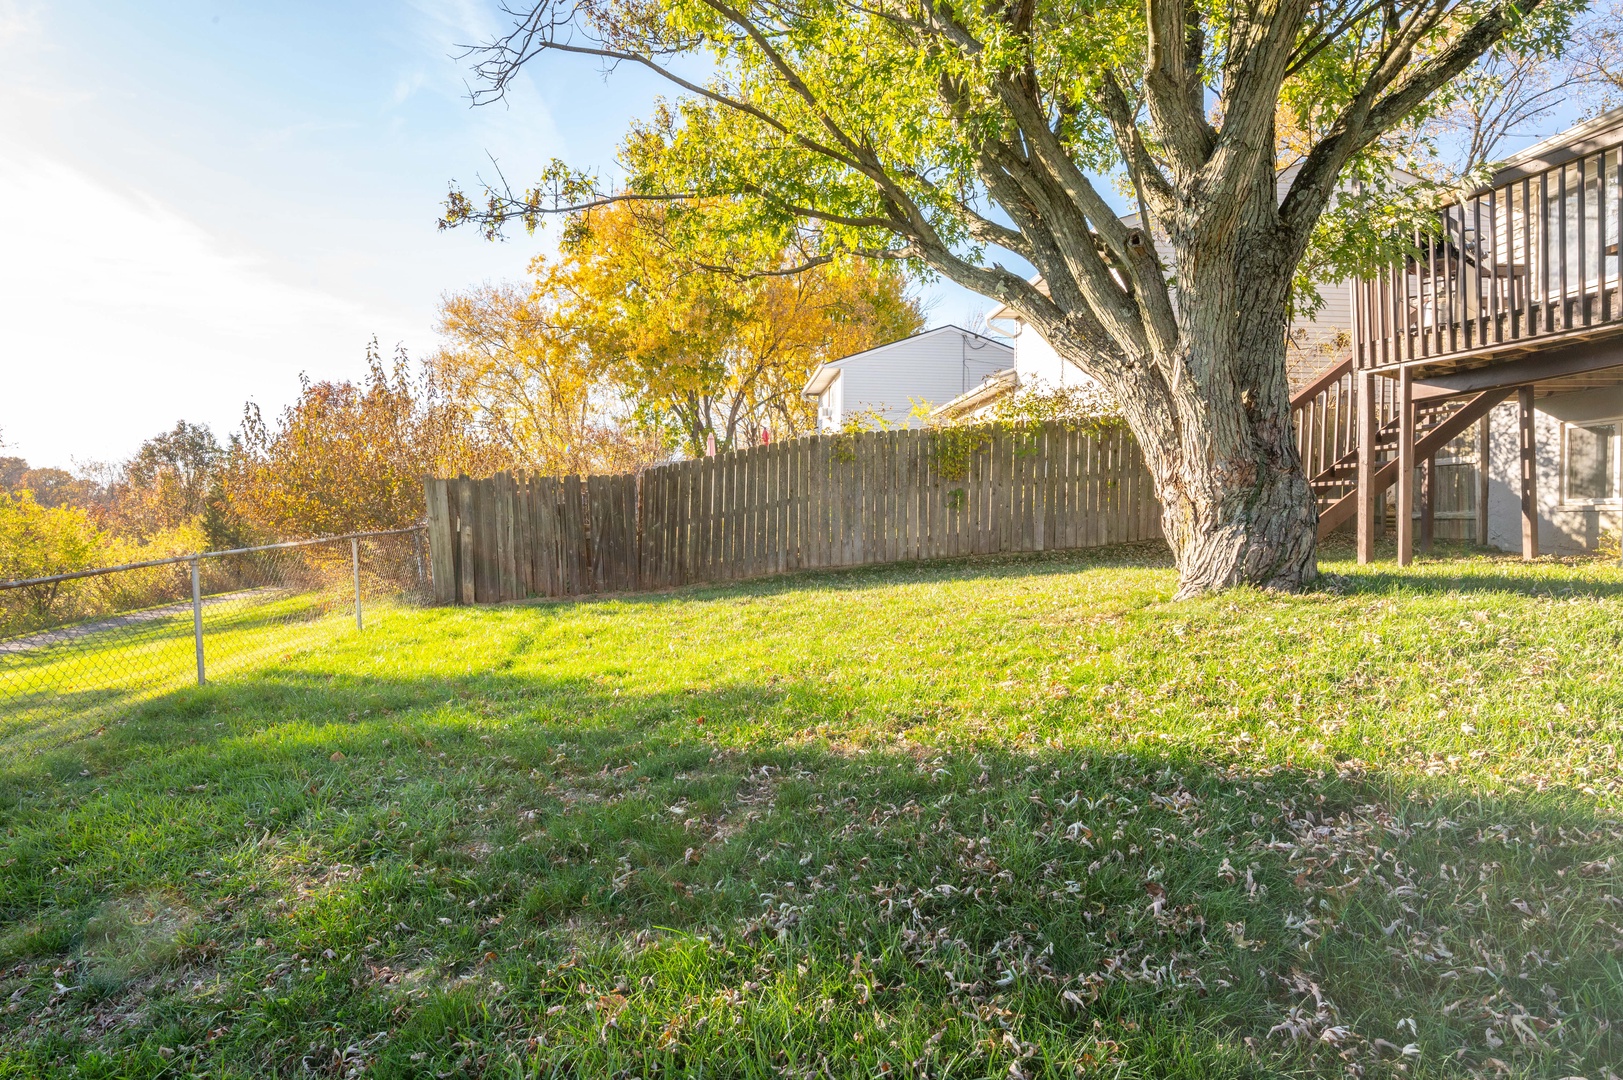 The back yard offers ample space for relaxation & play